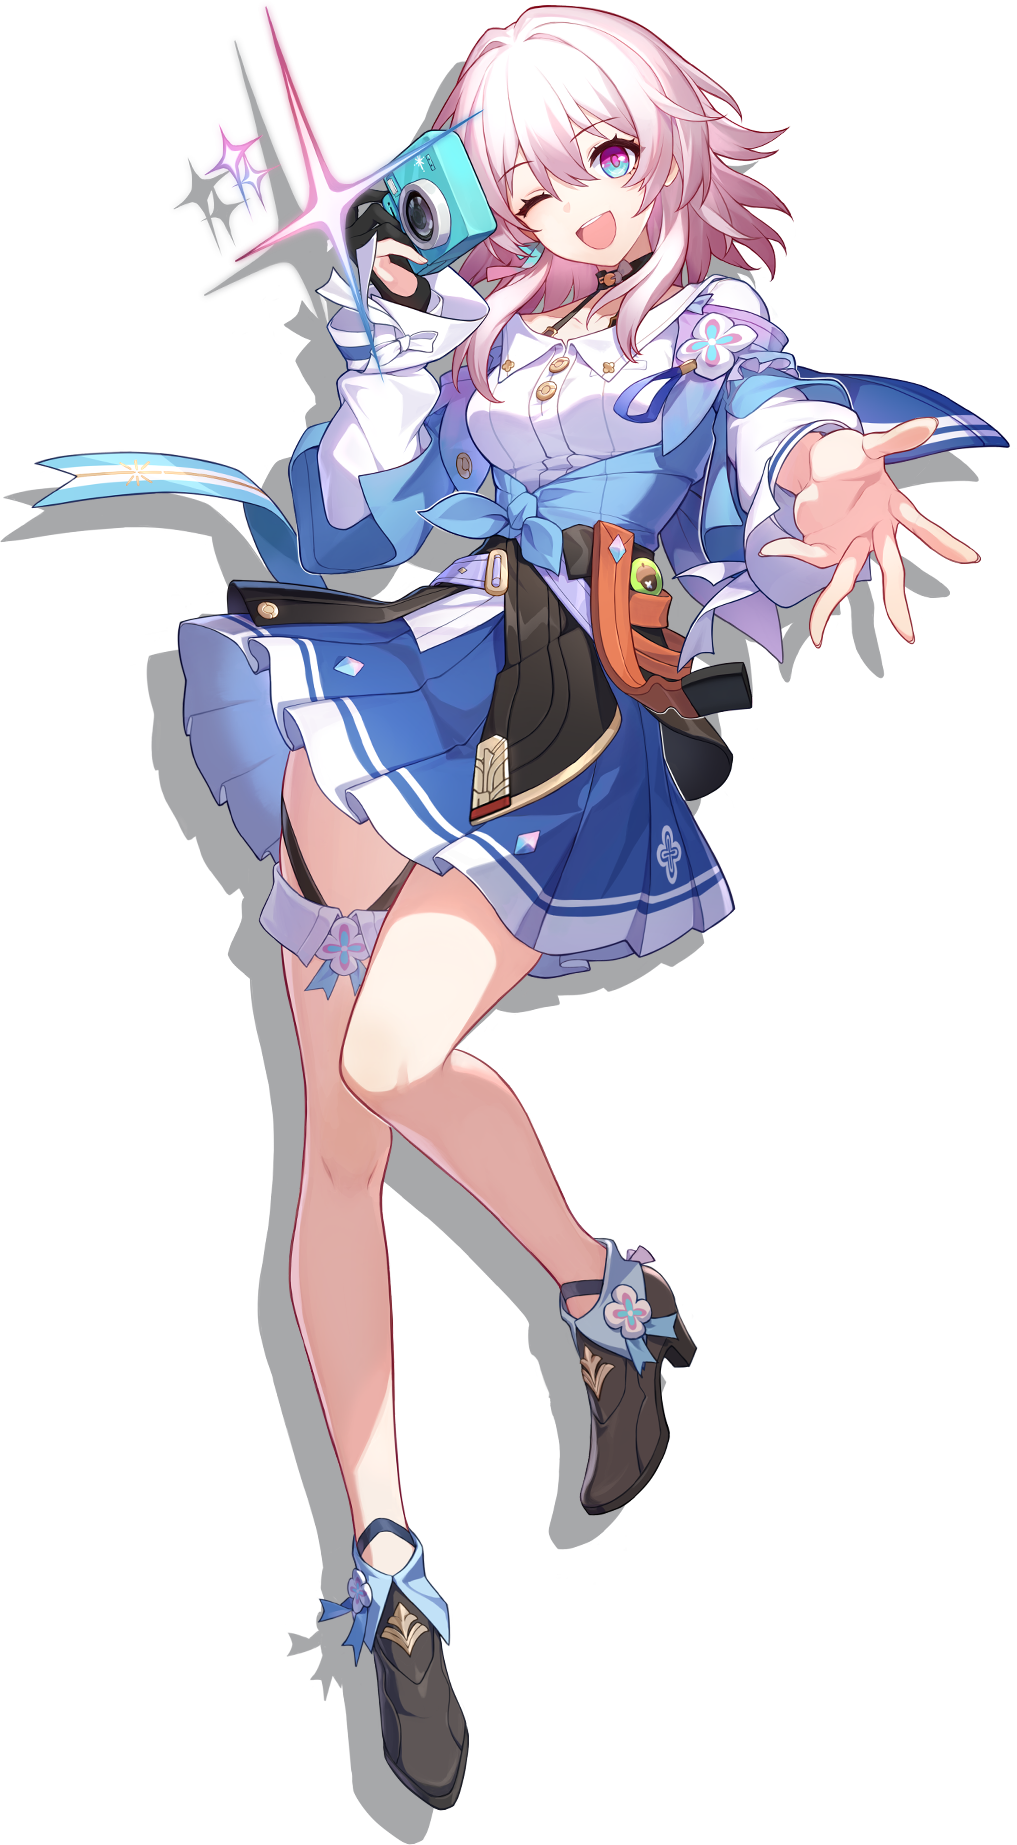 The Astral Express Archive — Honkai: Star Rail Transparent Character  Portrait